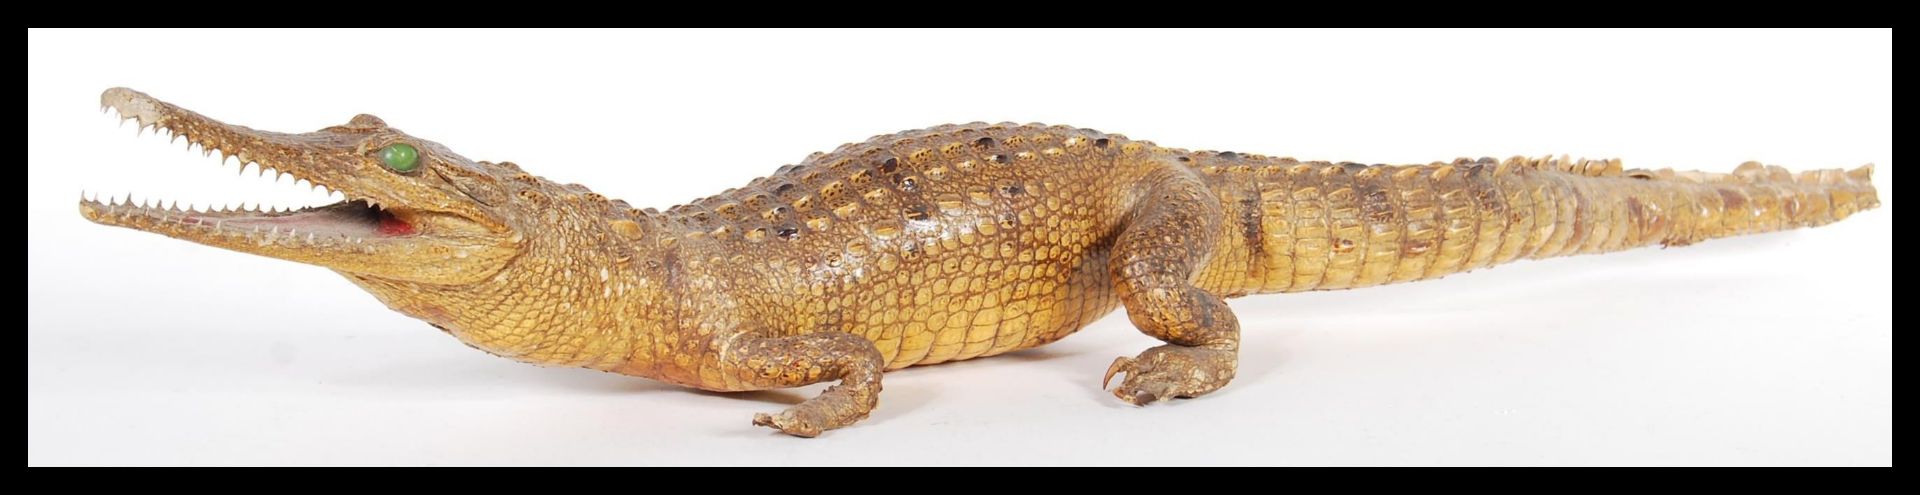 A vintage 20th Century taxidermy example of a Dwarf Caiman crocodile, raised on all four legs with